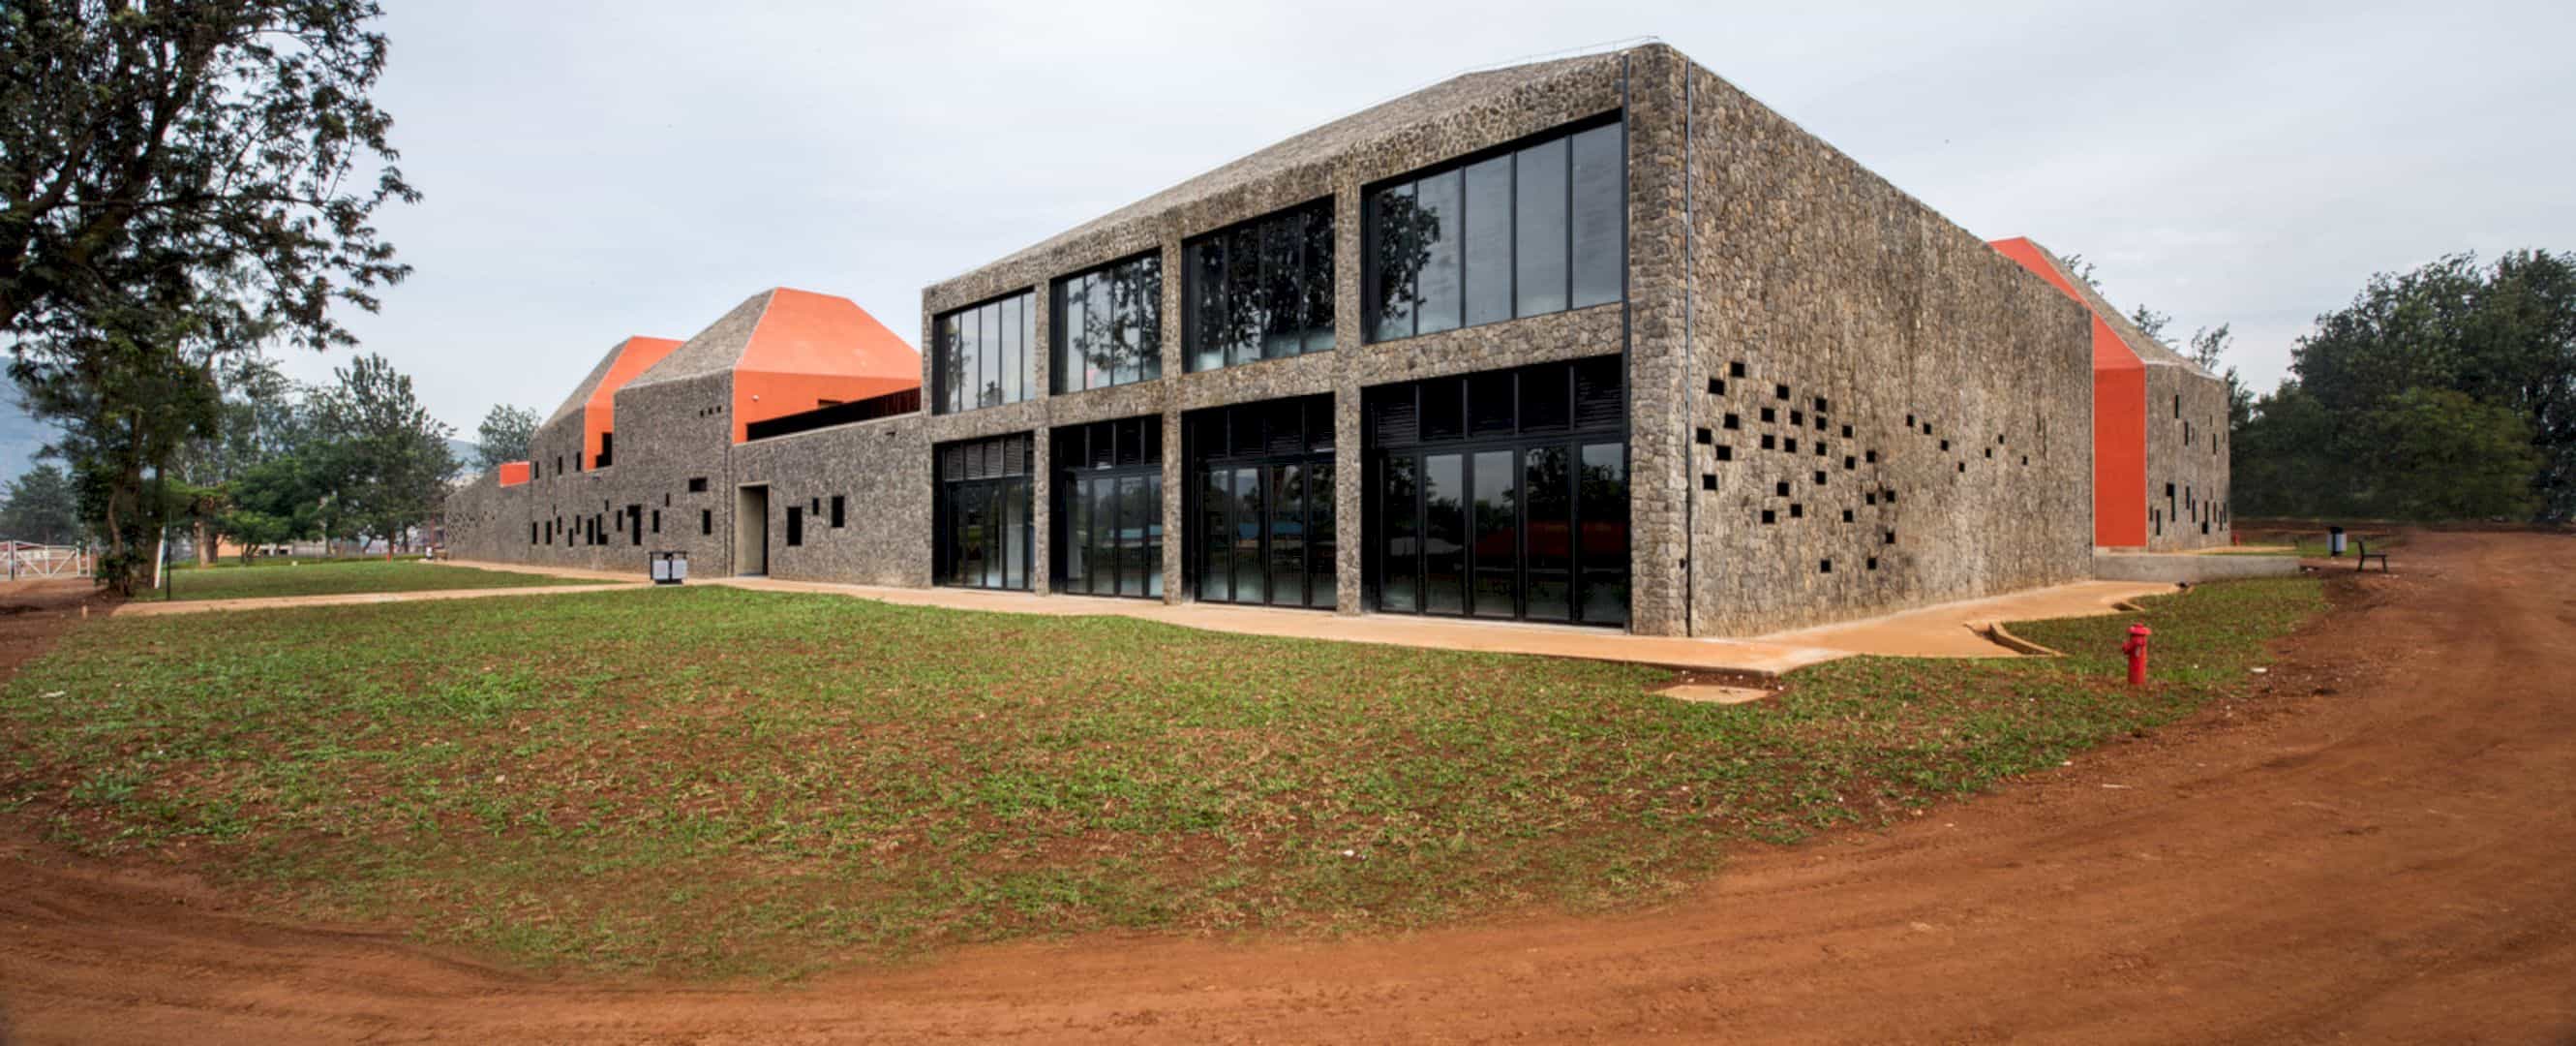 Faculty Of Architecture And Environmental Design A New Faculty Of Architecture In Kigali Inspired By Natures Shapes And Colors 10